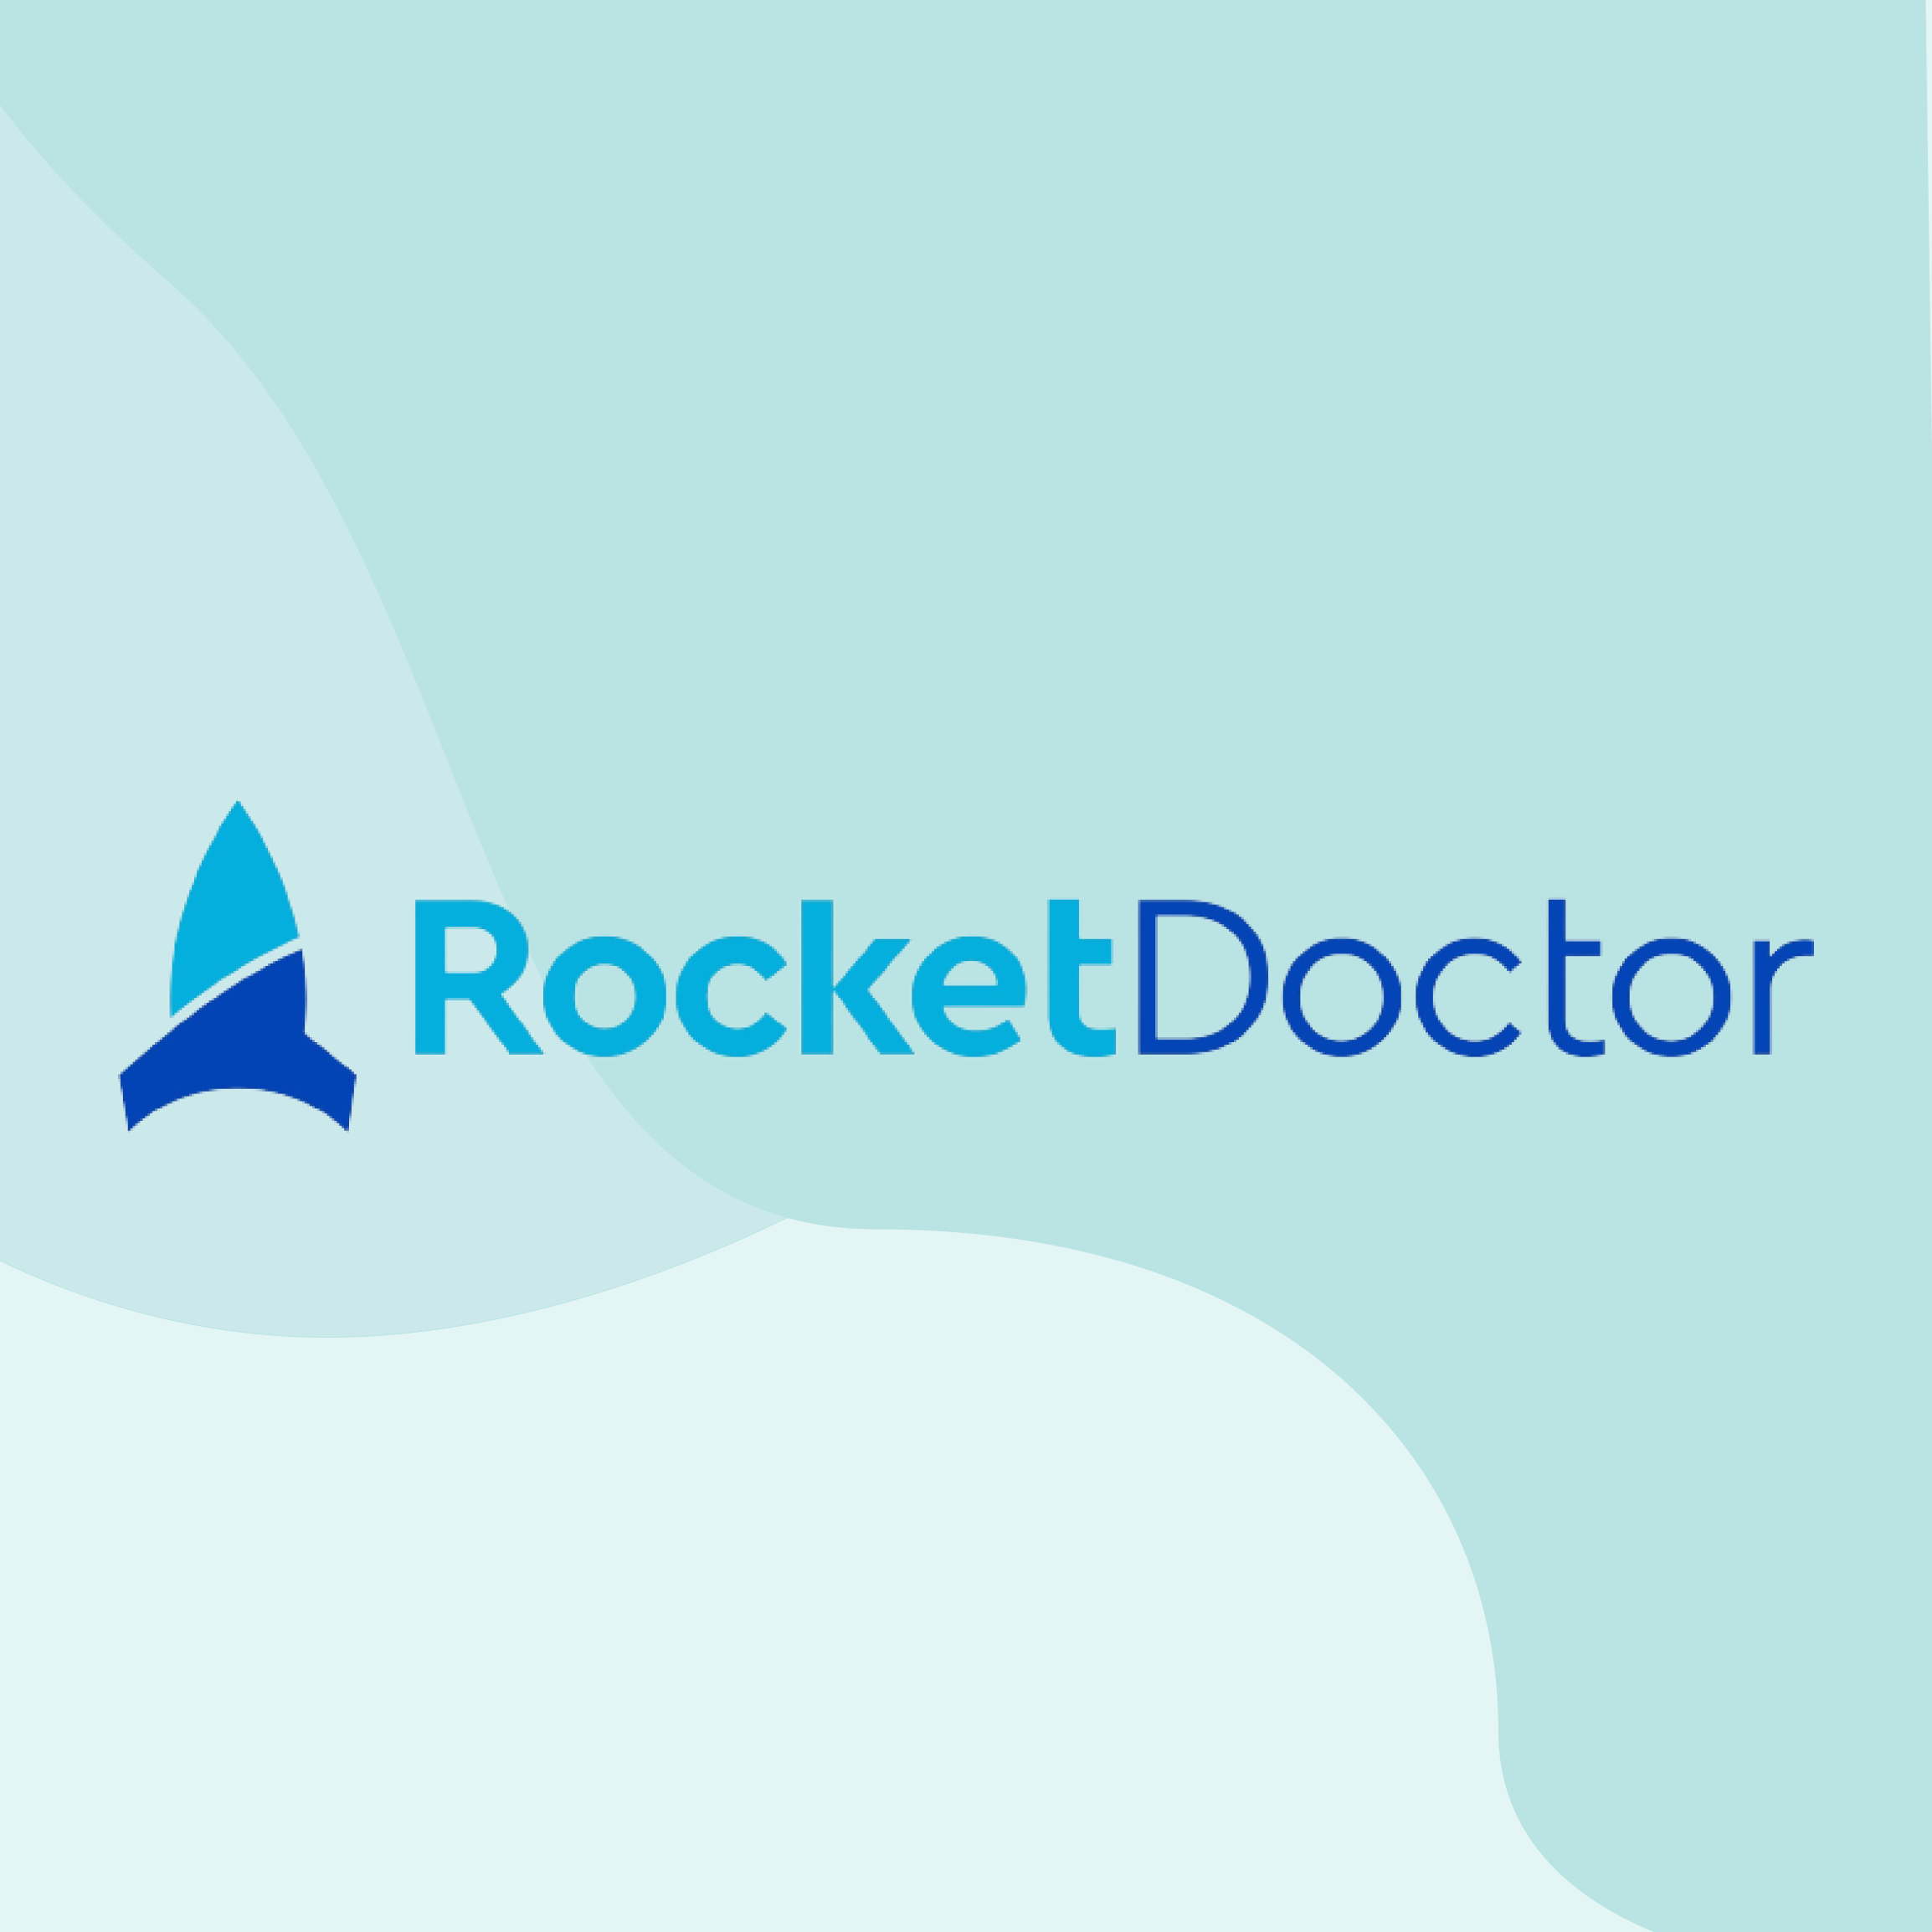 Rocket Doctor Using Remmie and Telehealth To Improve Patient Experience From Retail Clinic Locations Near Home